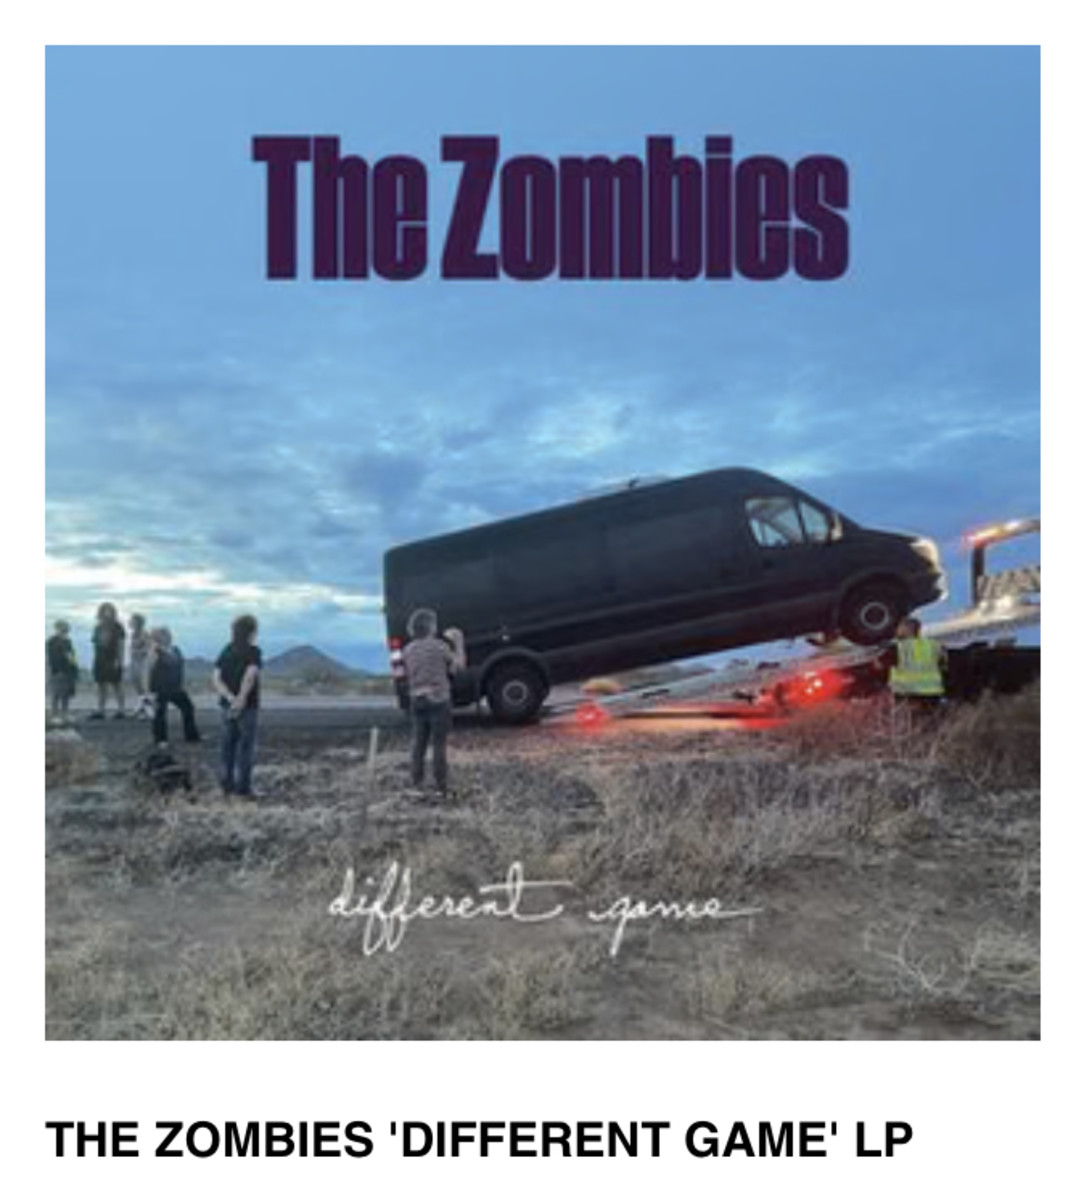 Get The Zombies latest album on vinyl in the Goldmine shop by clicking above.